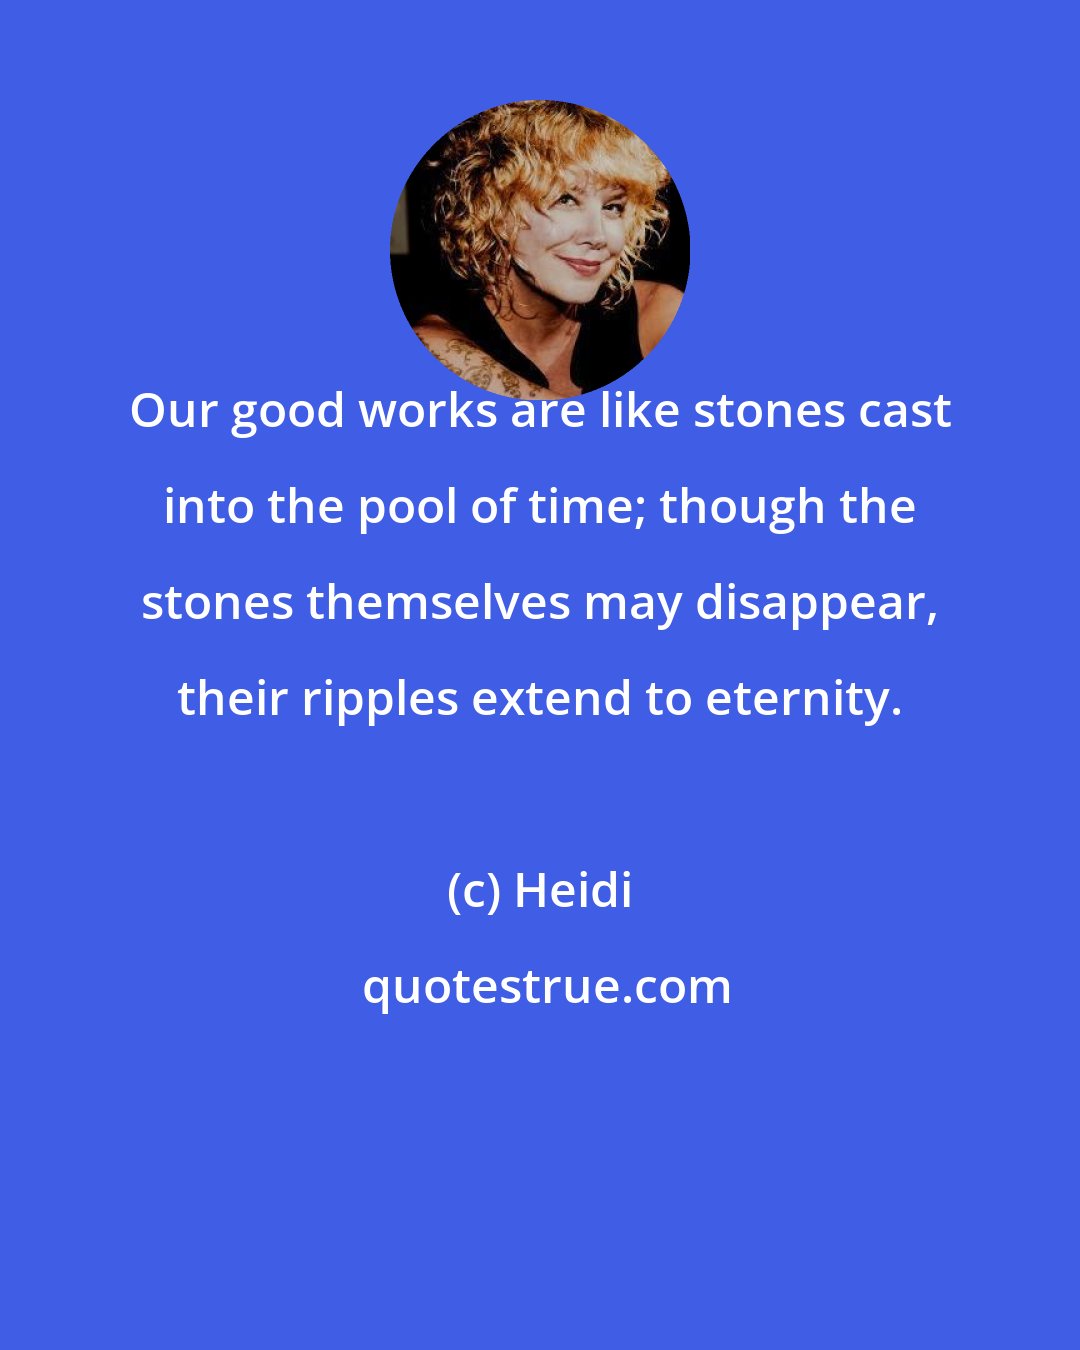 Heidi: Our good works are like stones cast into the pool of time; though the stones themselves may disappear, their ripples extend to eternity.